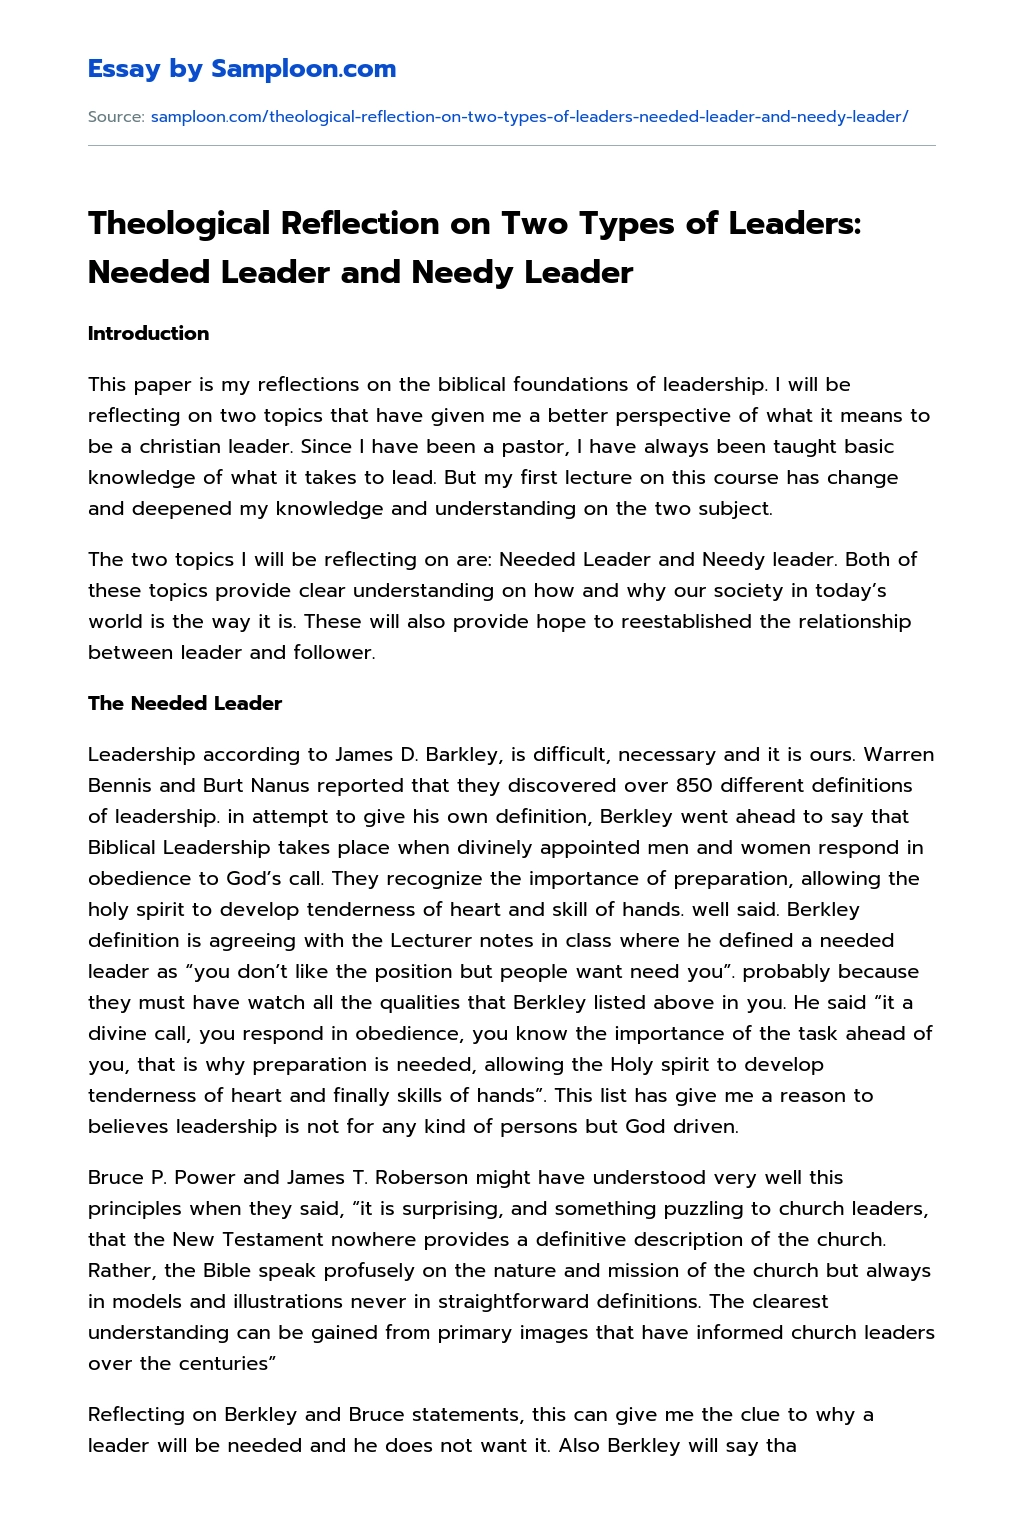 Theological Reflection on Two Types of Leaders: Needed Leader and Needy Leader essay